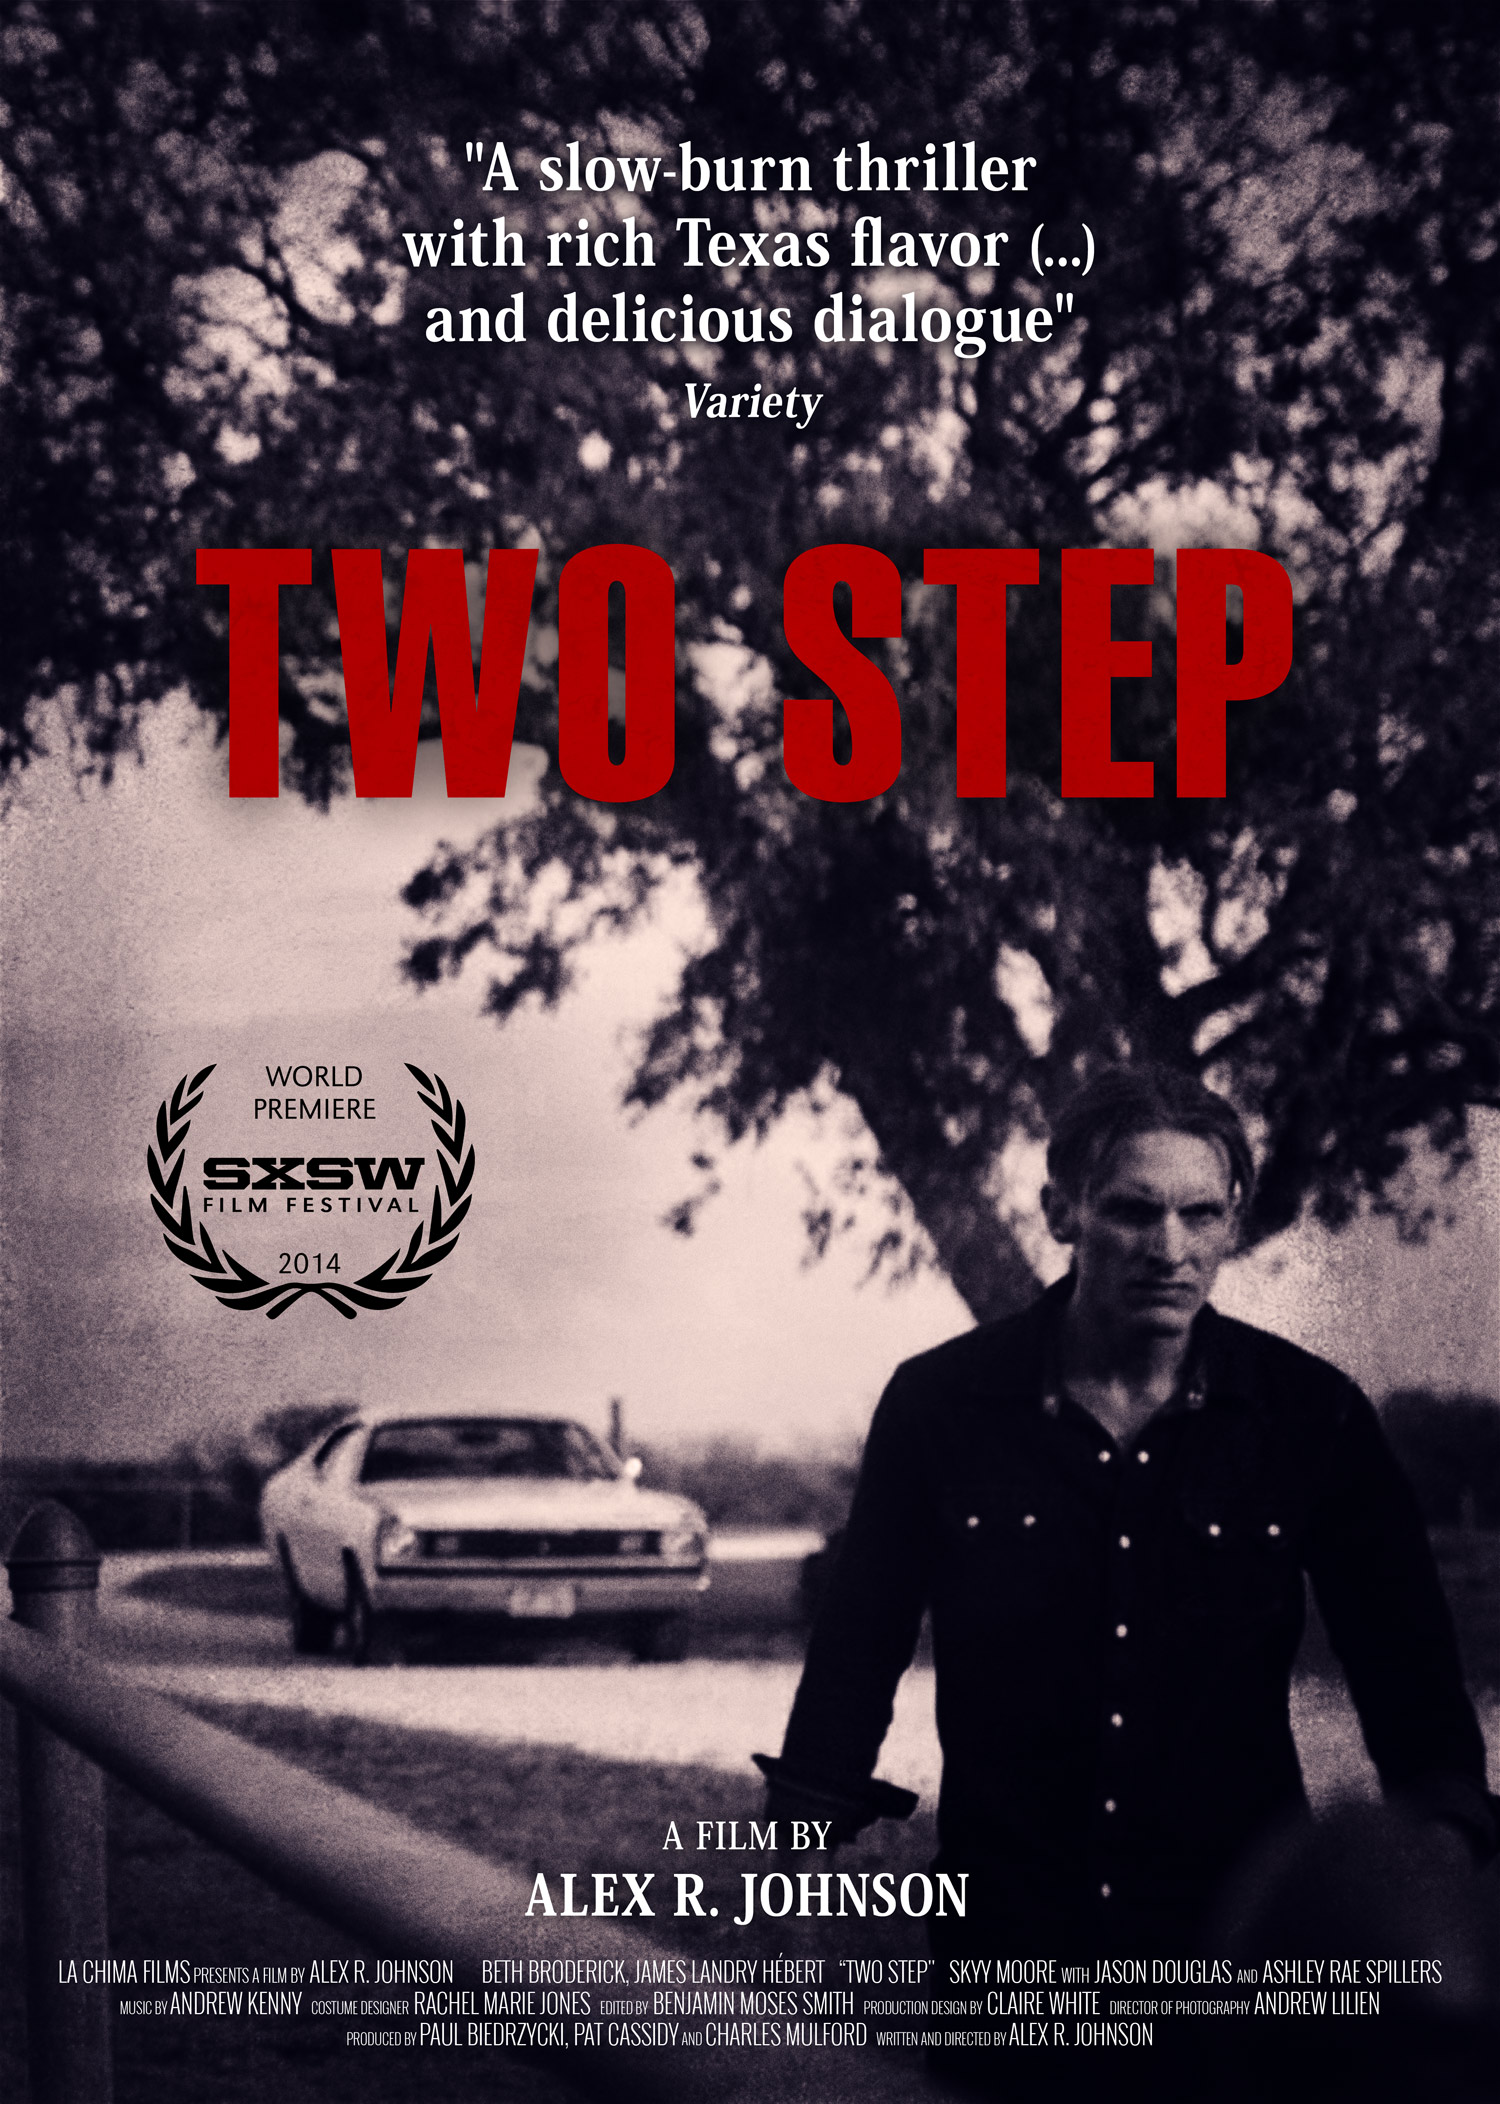 Set in Texas, the film Two-Step debuted at SXSW in 2014 and was nominated for a SXSW Audience Award, among others.